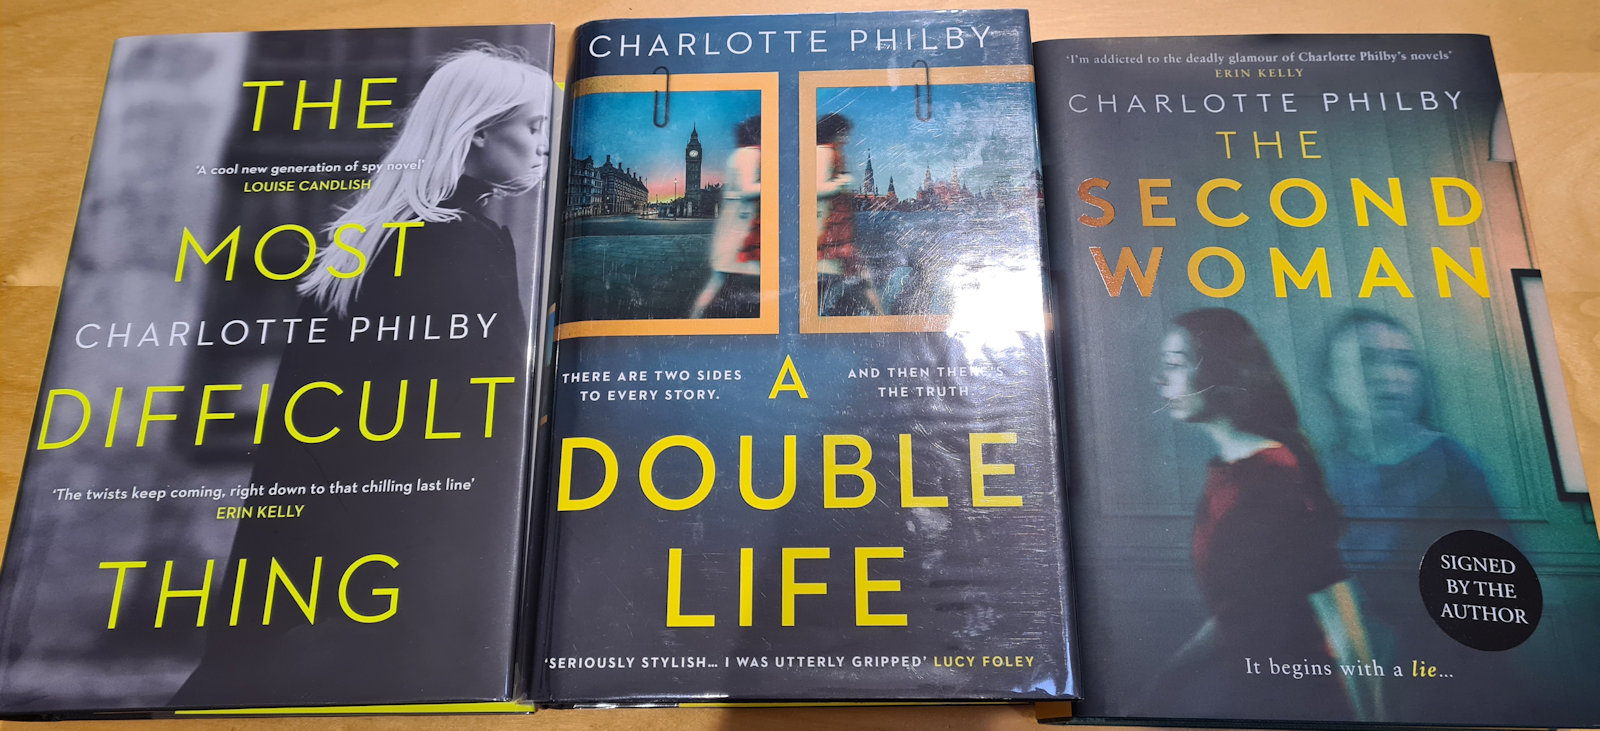 Three hardback books side by side: The Most Difficult Thing, A Double Life and The Second Woman